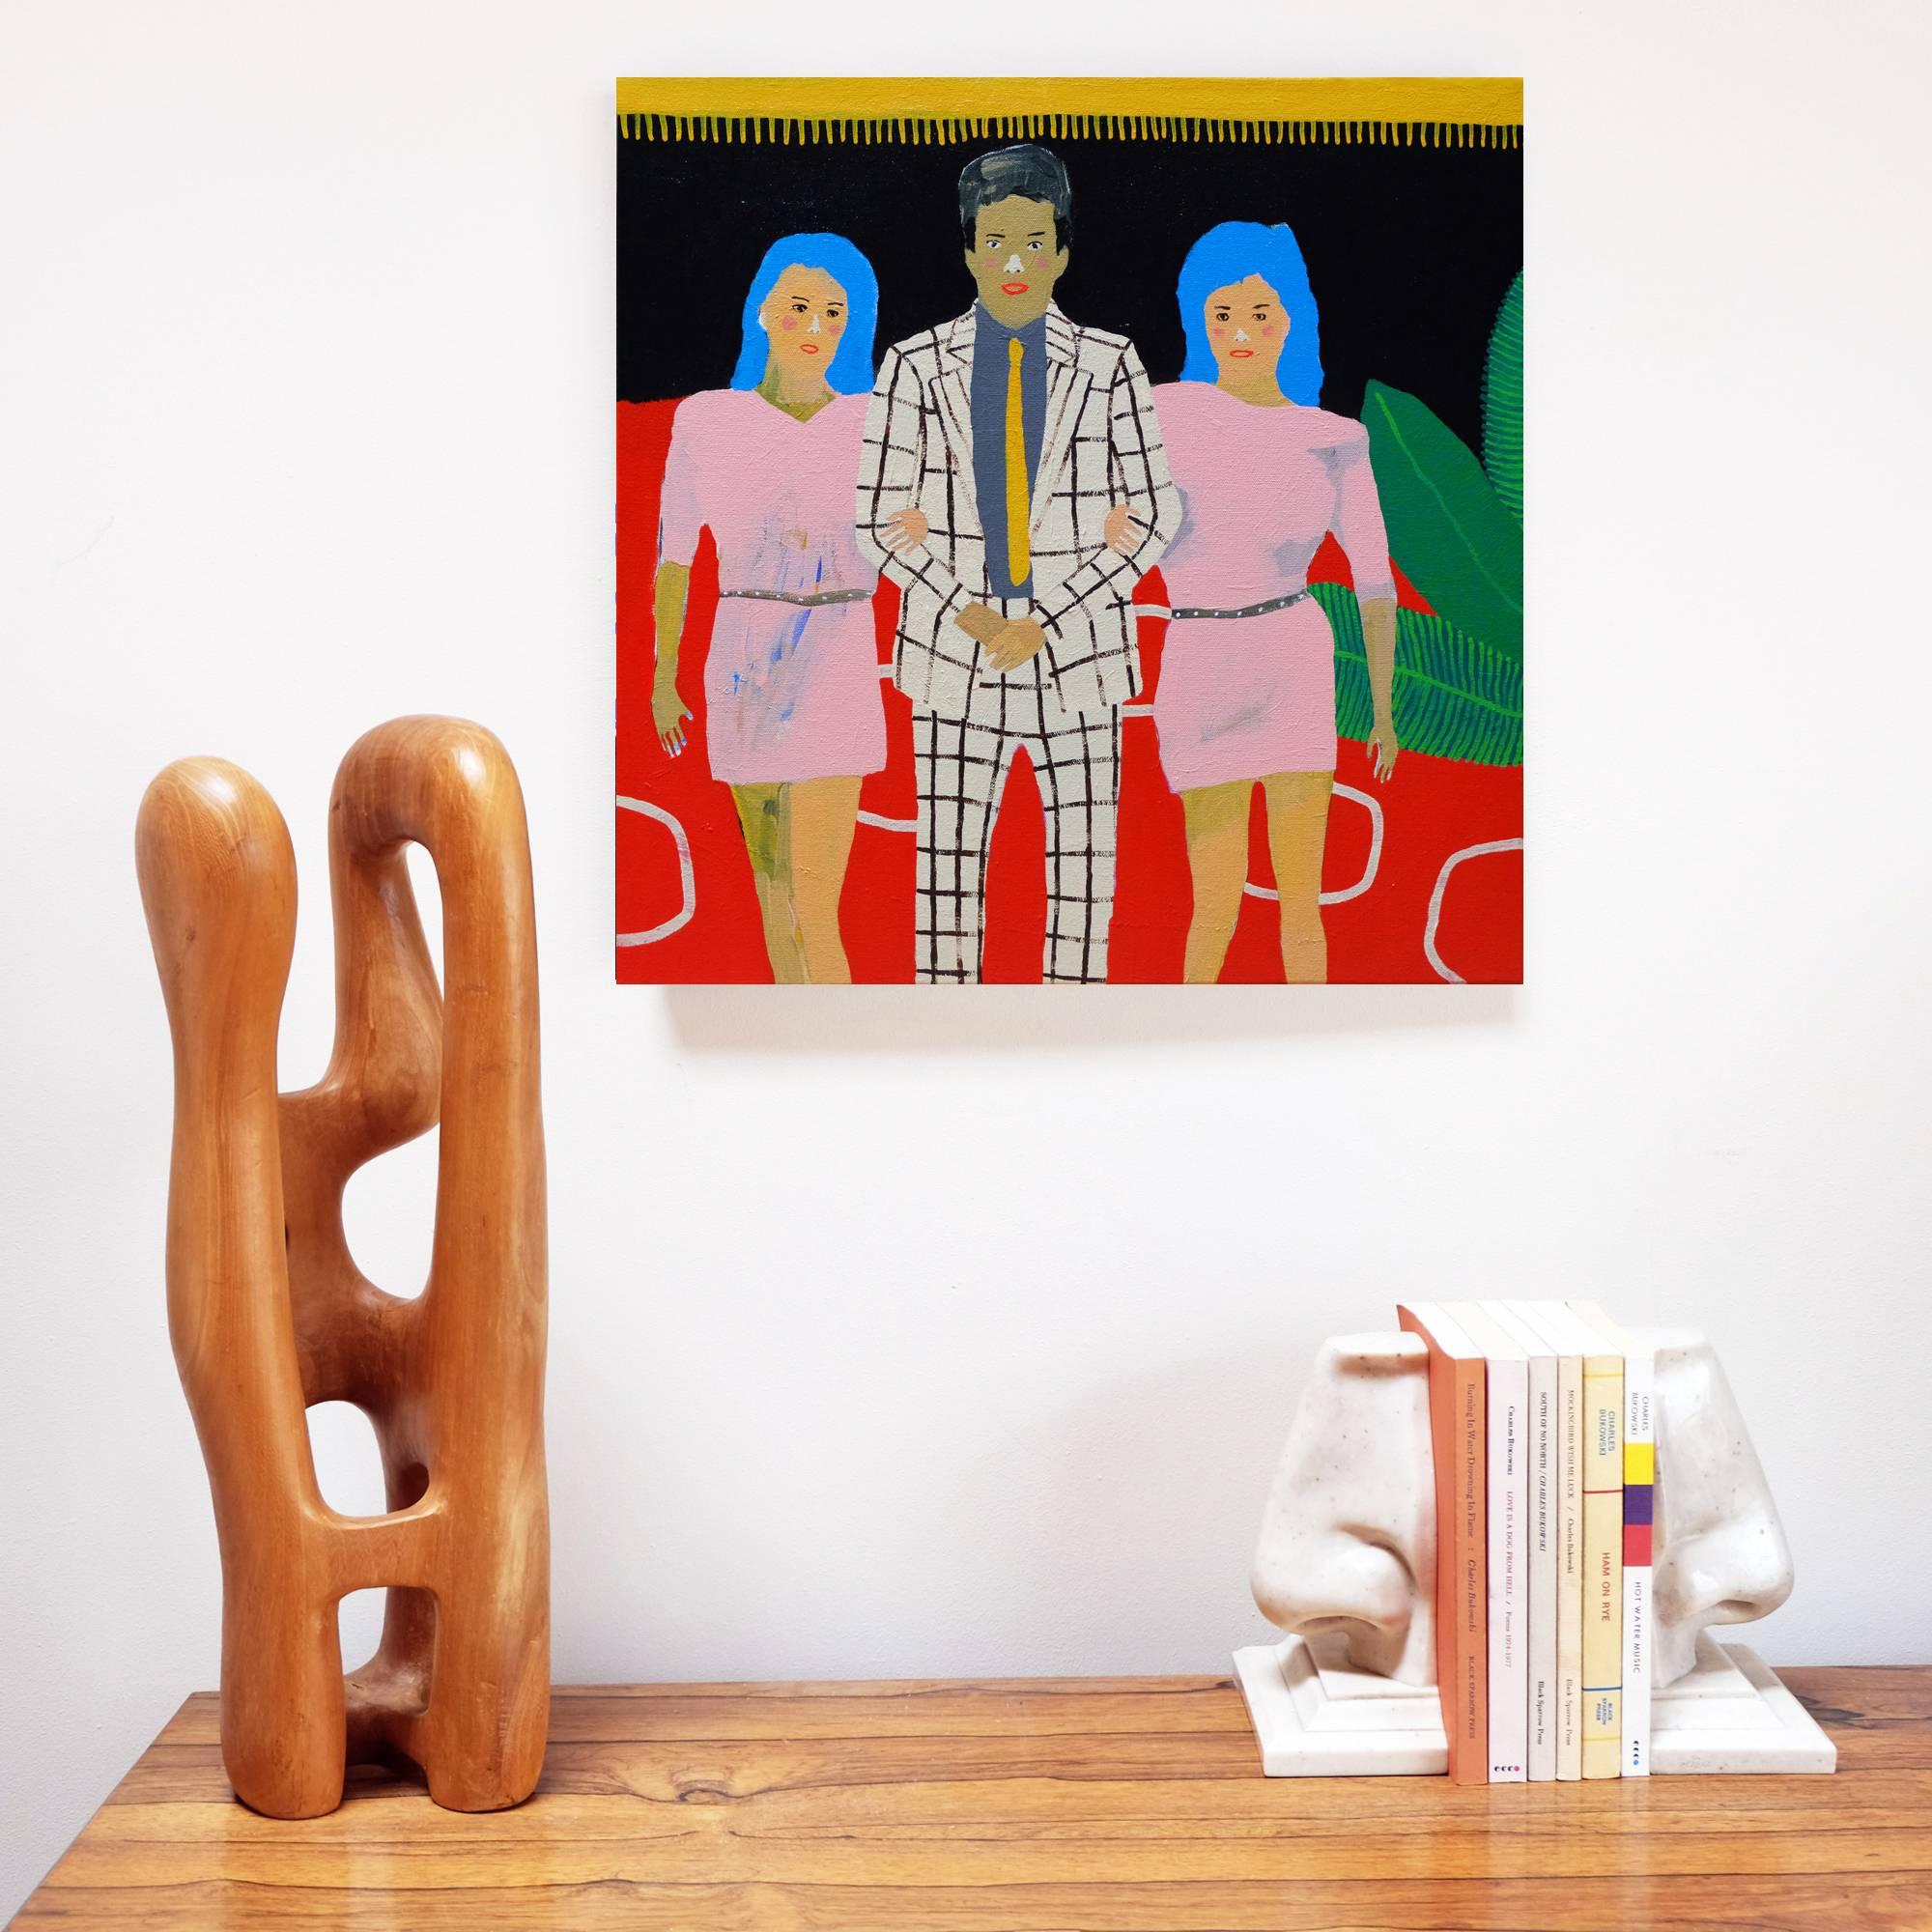 Acrylic on canvas by Alan Fears, 2017.

Alan Fears (b. 1974) is an emerging British artist who was shortlisted for the John Moores Painting Prize 2018 and featured on the cover of the summer issue 229 of the Paris Review 2019.

'A naive artist,